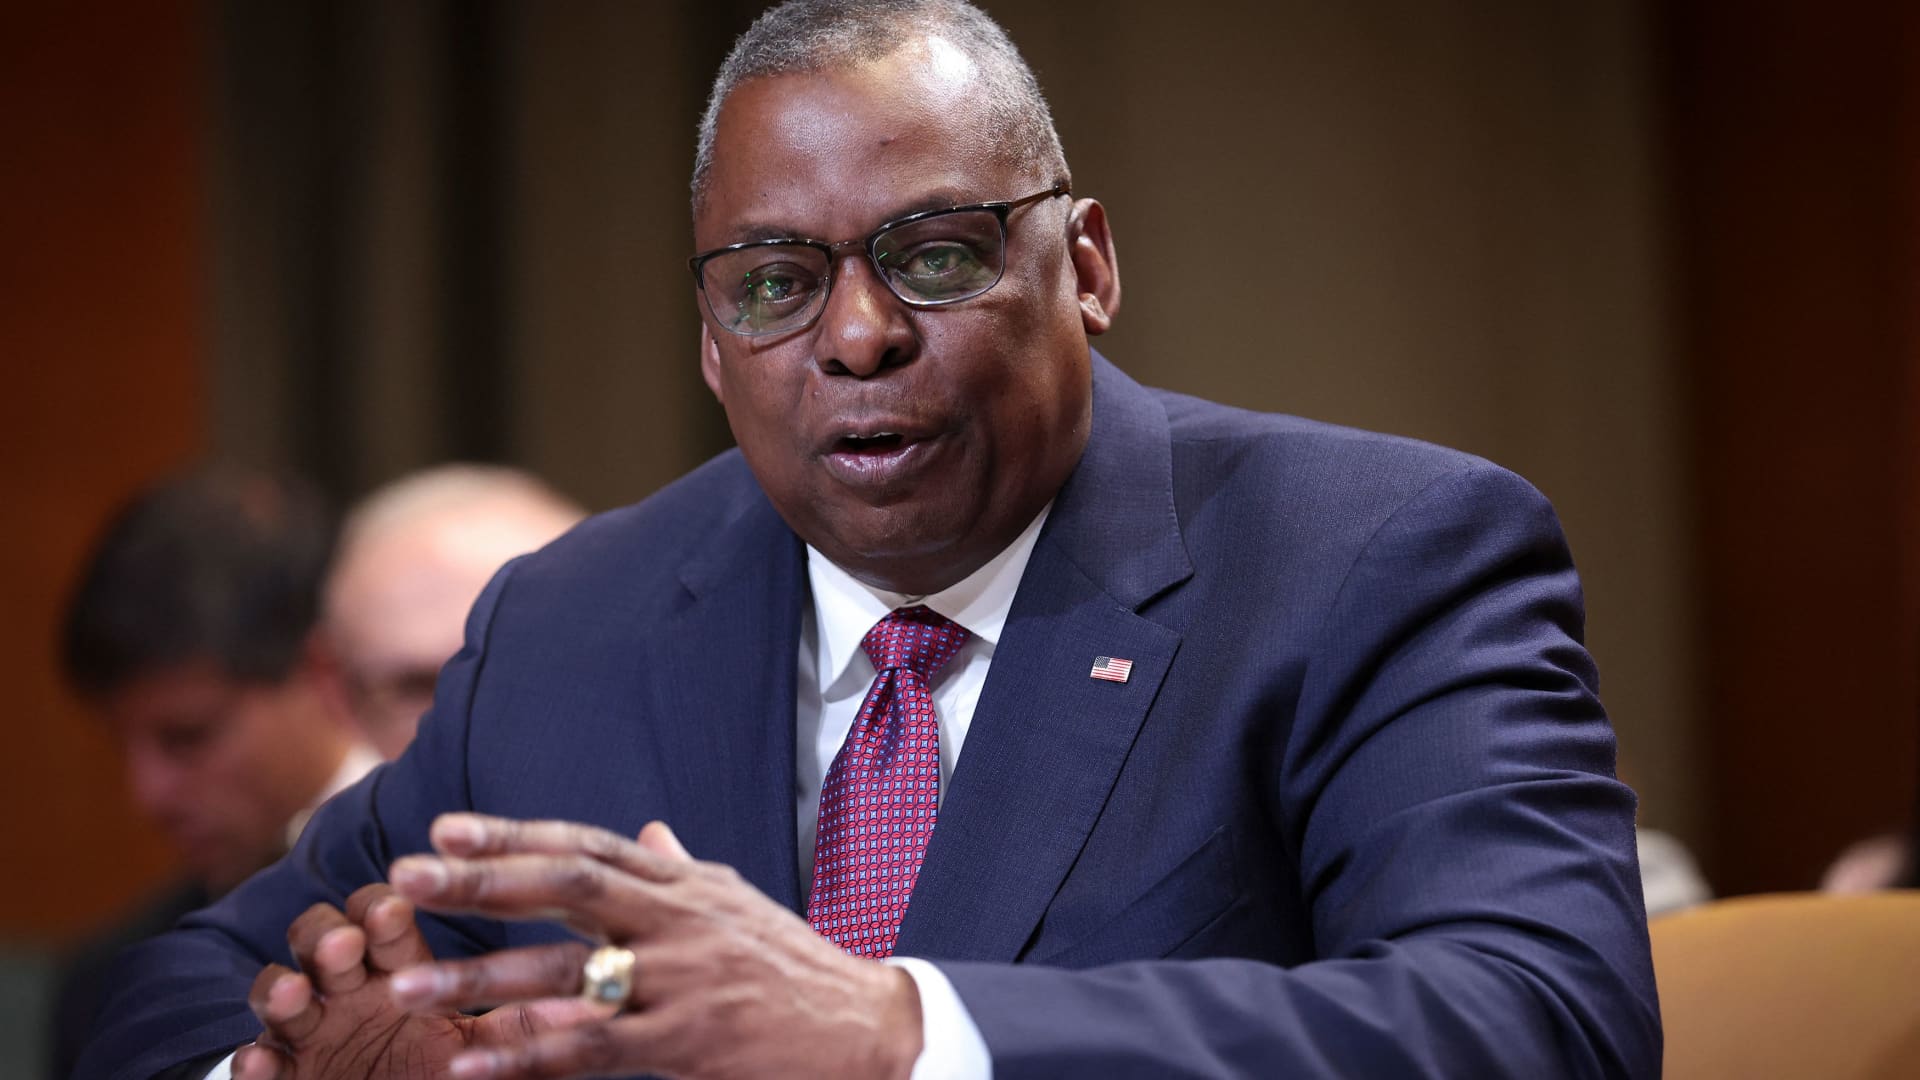 U.S. Secretary of Defense Lloyd Austin testifies before the Senate Appropriations Committee Subcommittee on Defense in Washington, U.S., May 3, 2022. The committee heard testimony to examine proposed budget estimates and justification for fiscal year 2023 for the Department of Defense. 